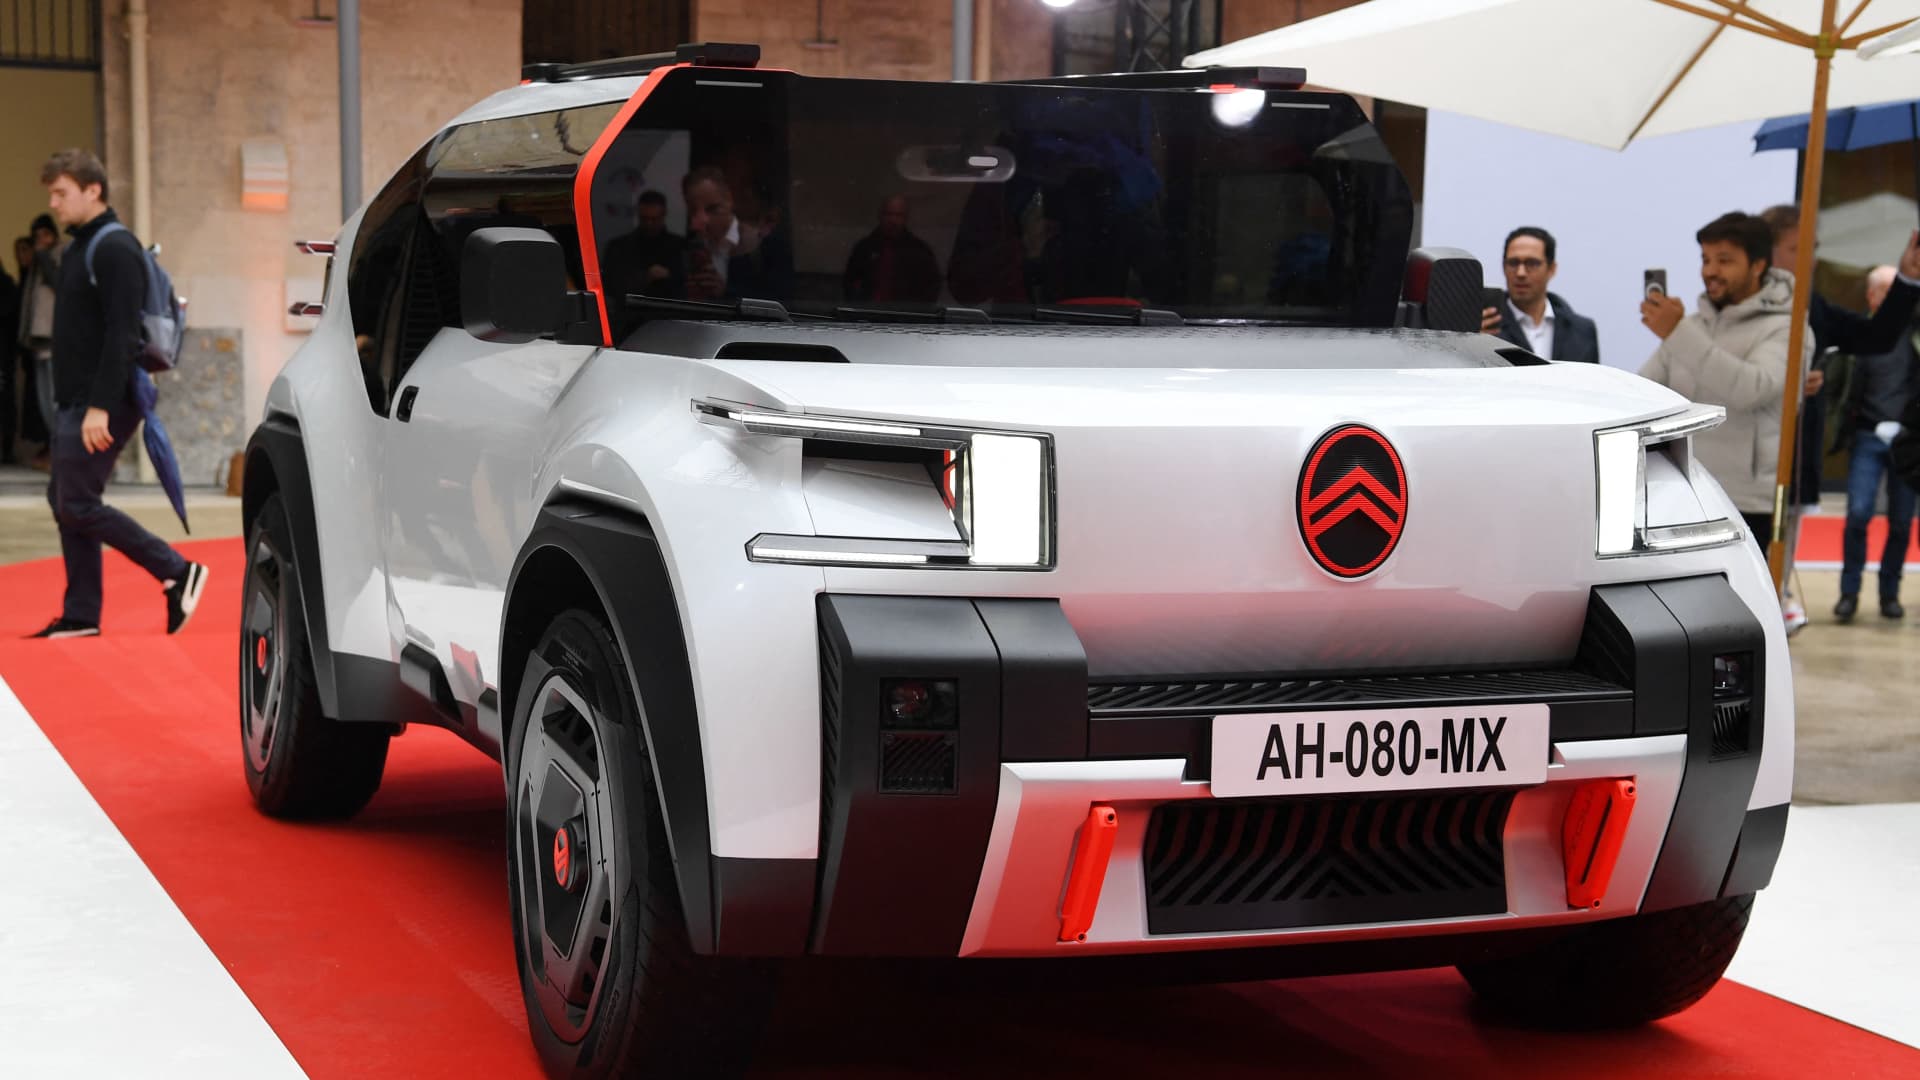 Citroen says EV concept uses cardboard and has top speed of 68 mph